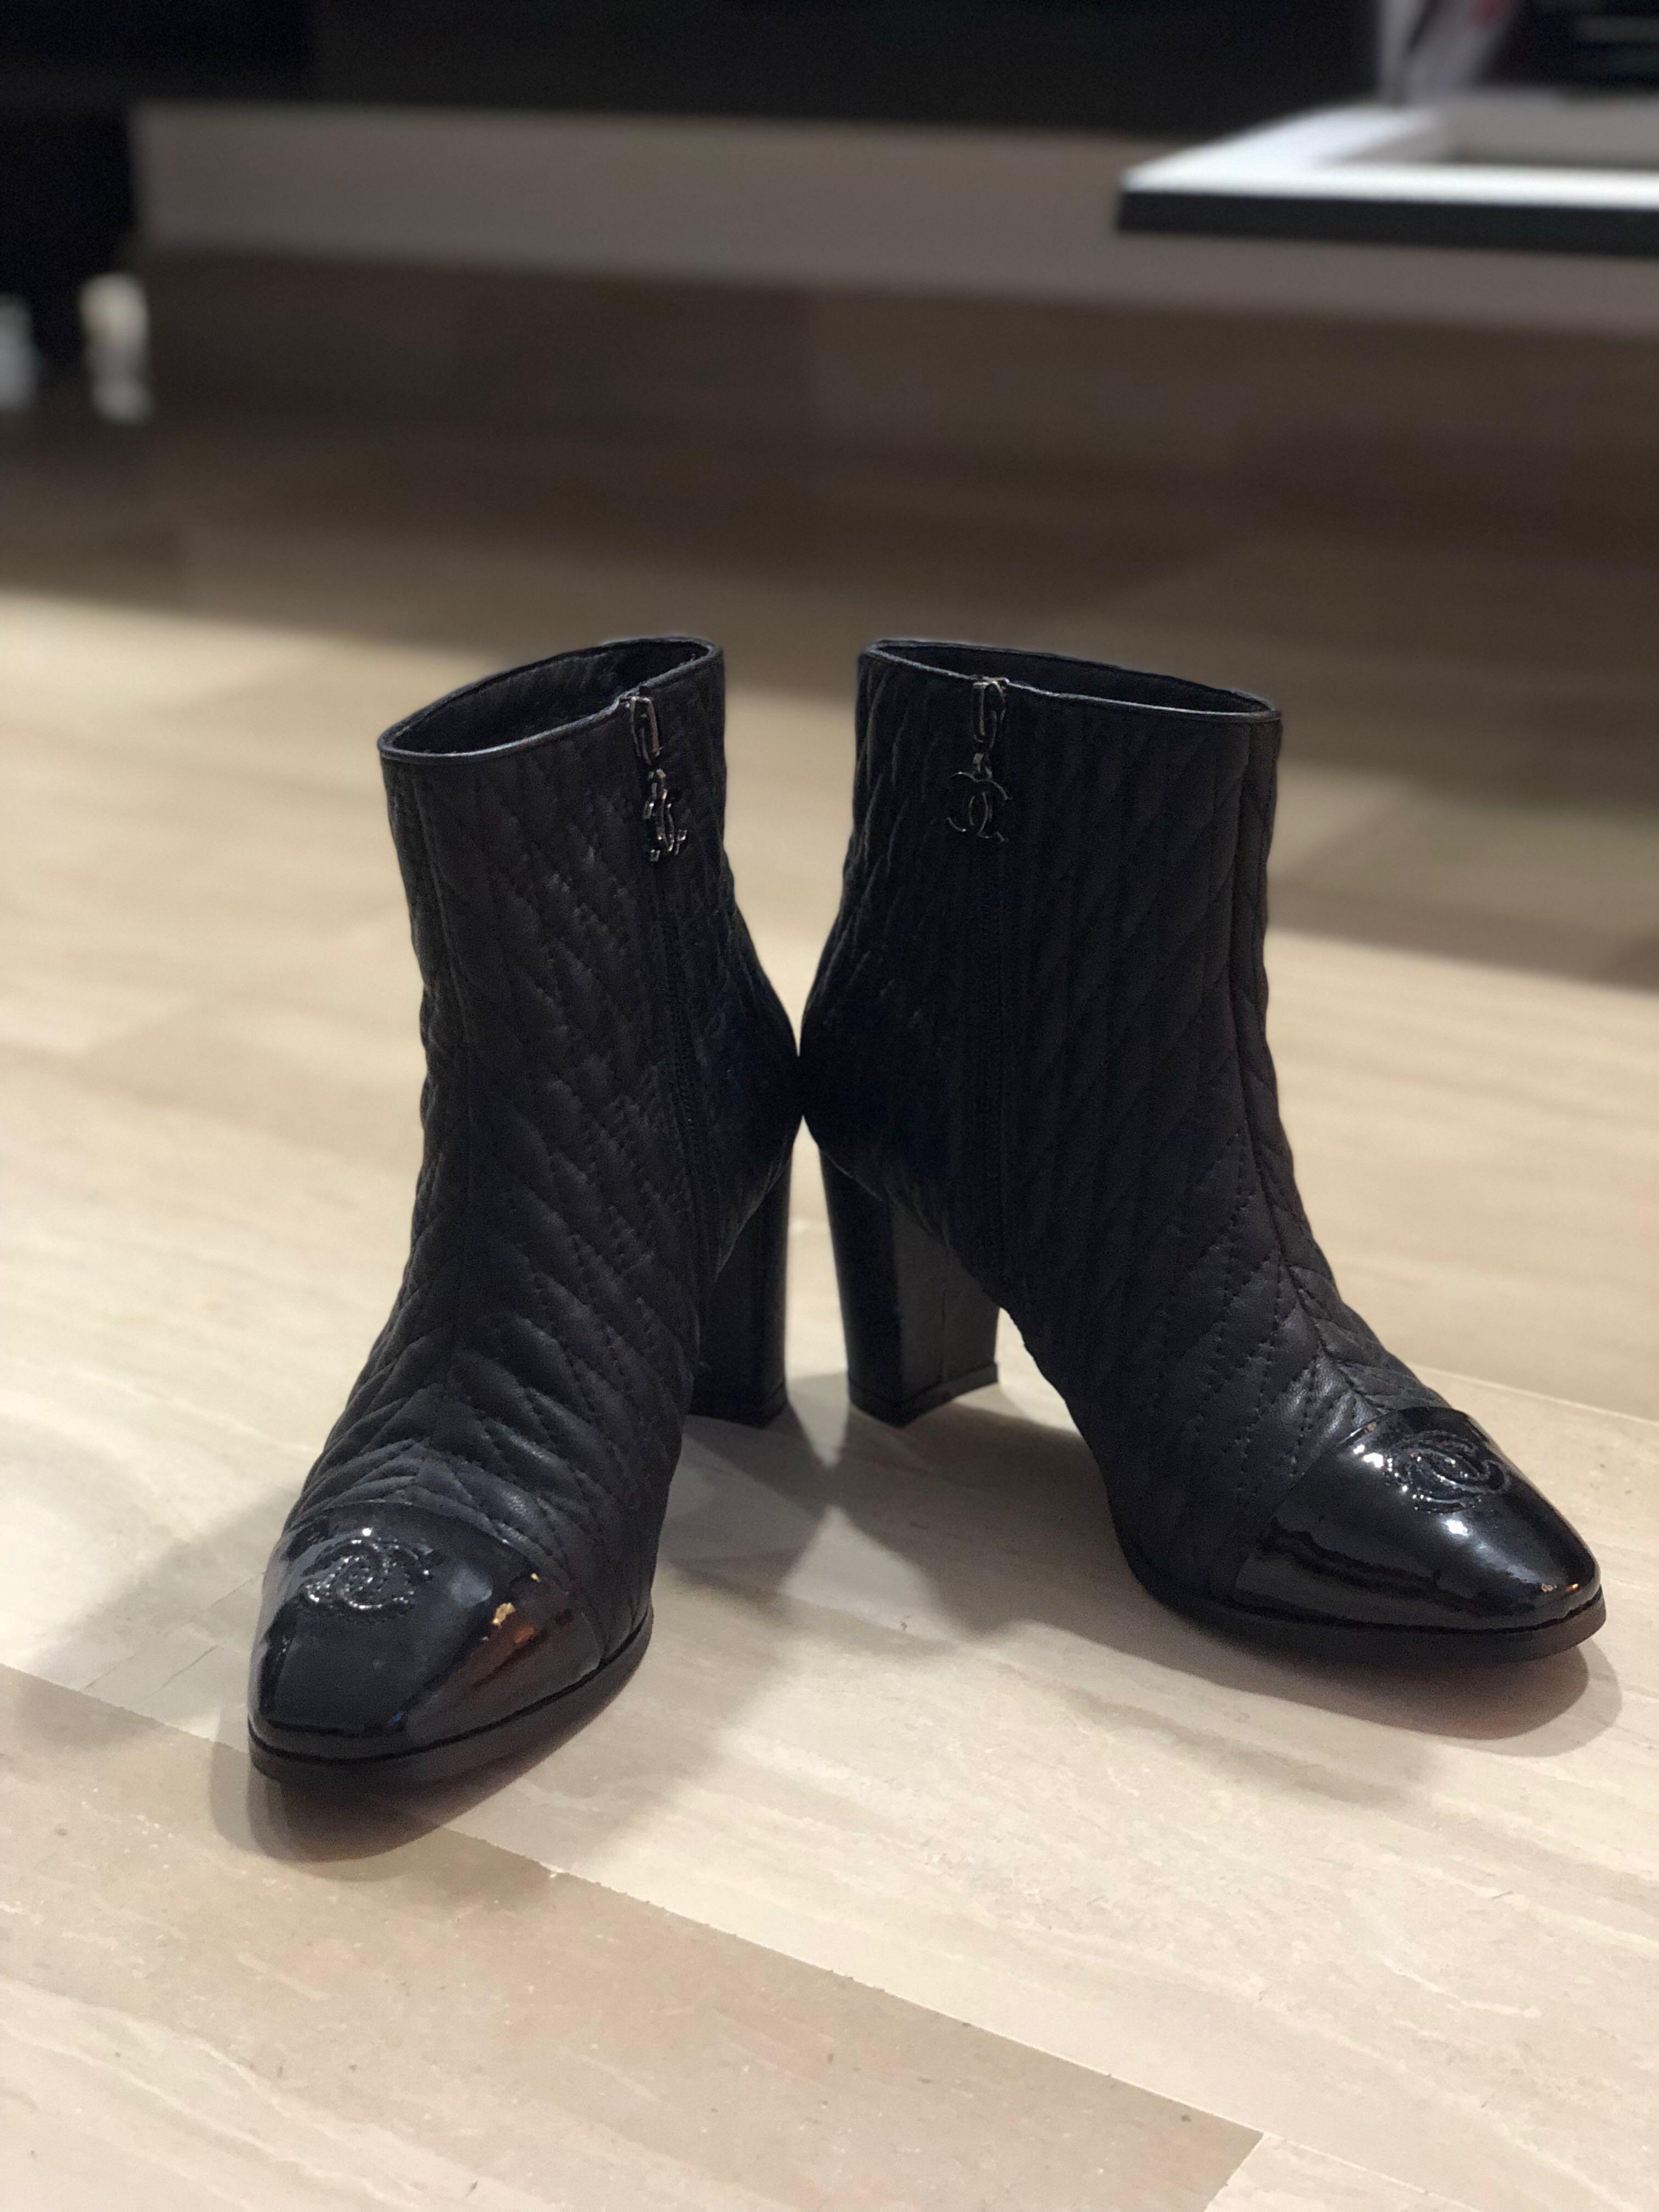 vintage chanel boots